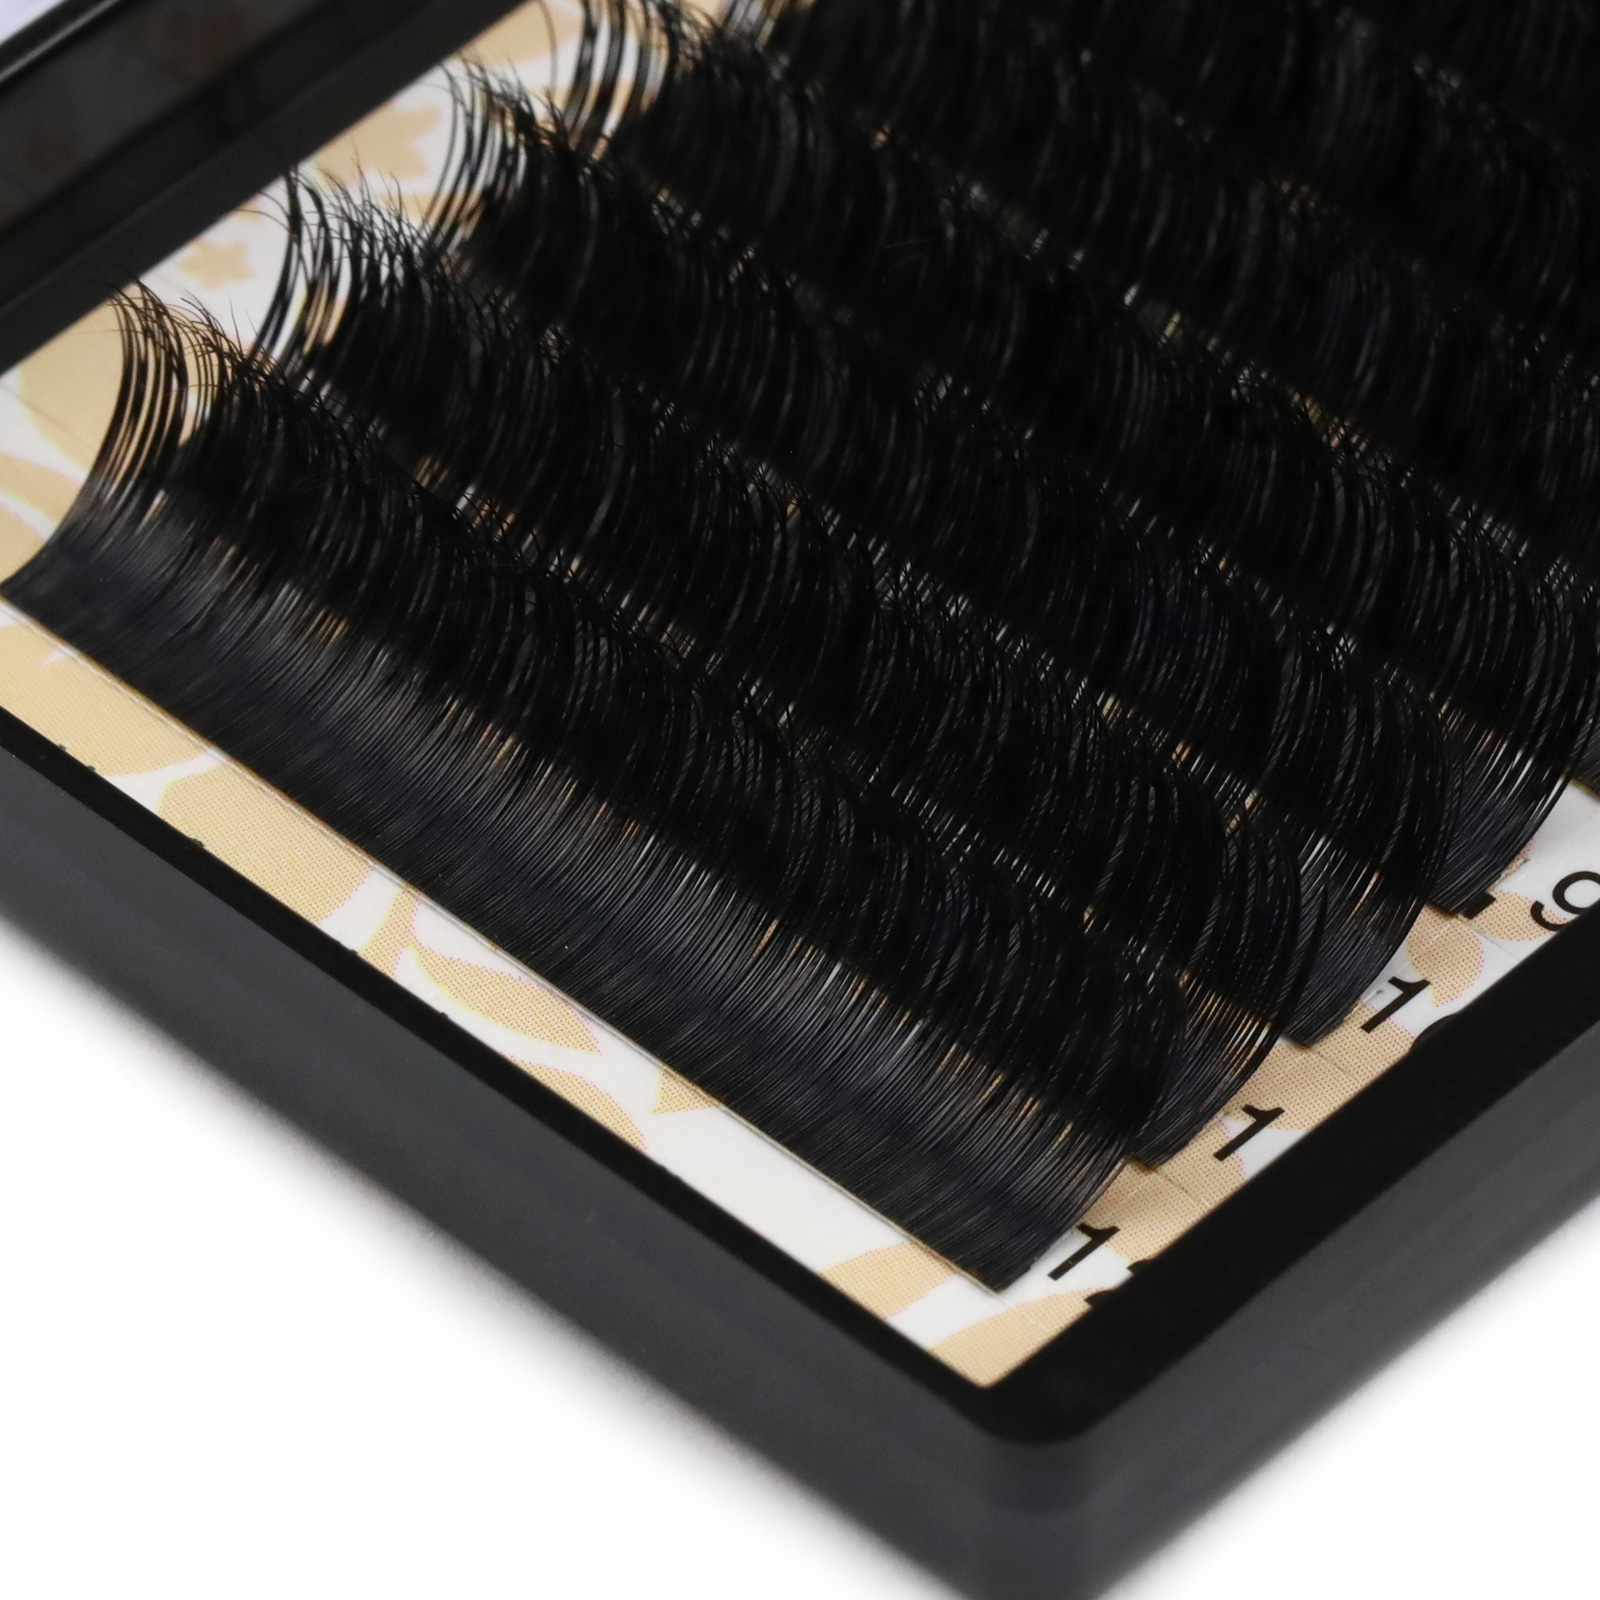 2021 High Quality 100% Real Mink Fur Eyelash Extensions with Customized Package in Canada